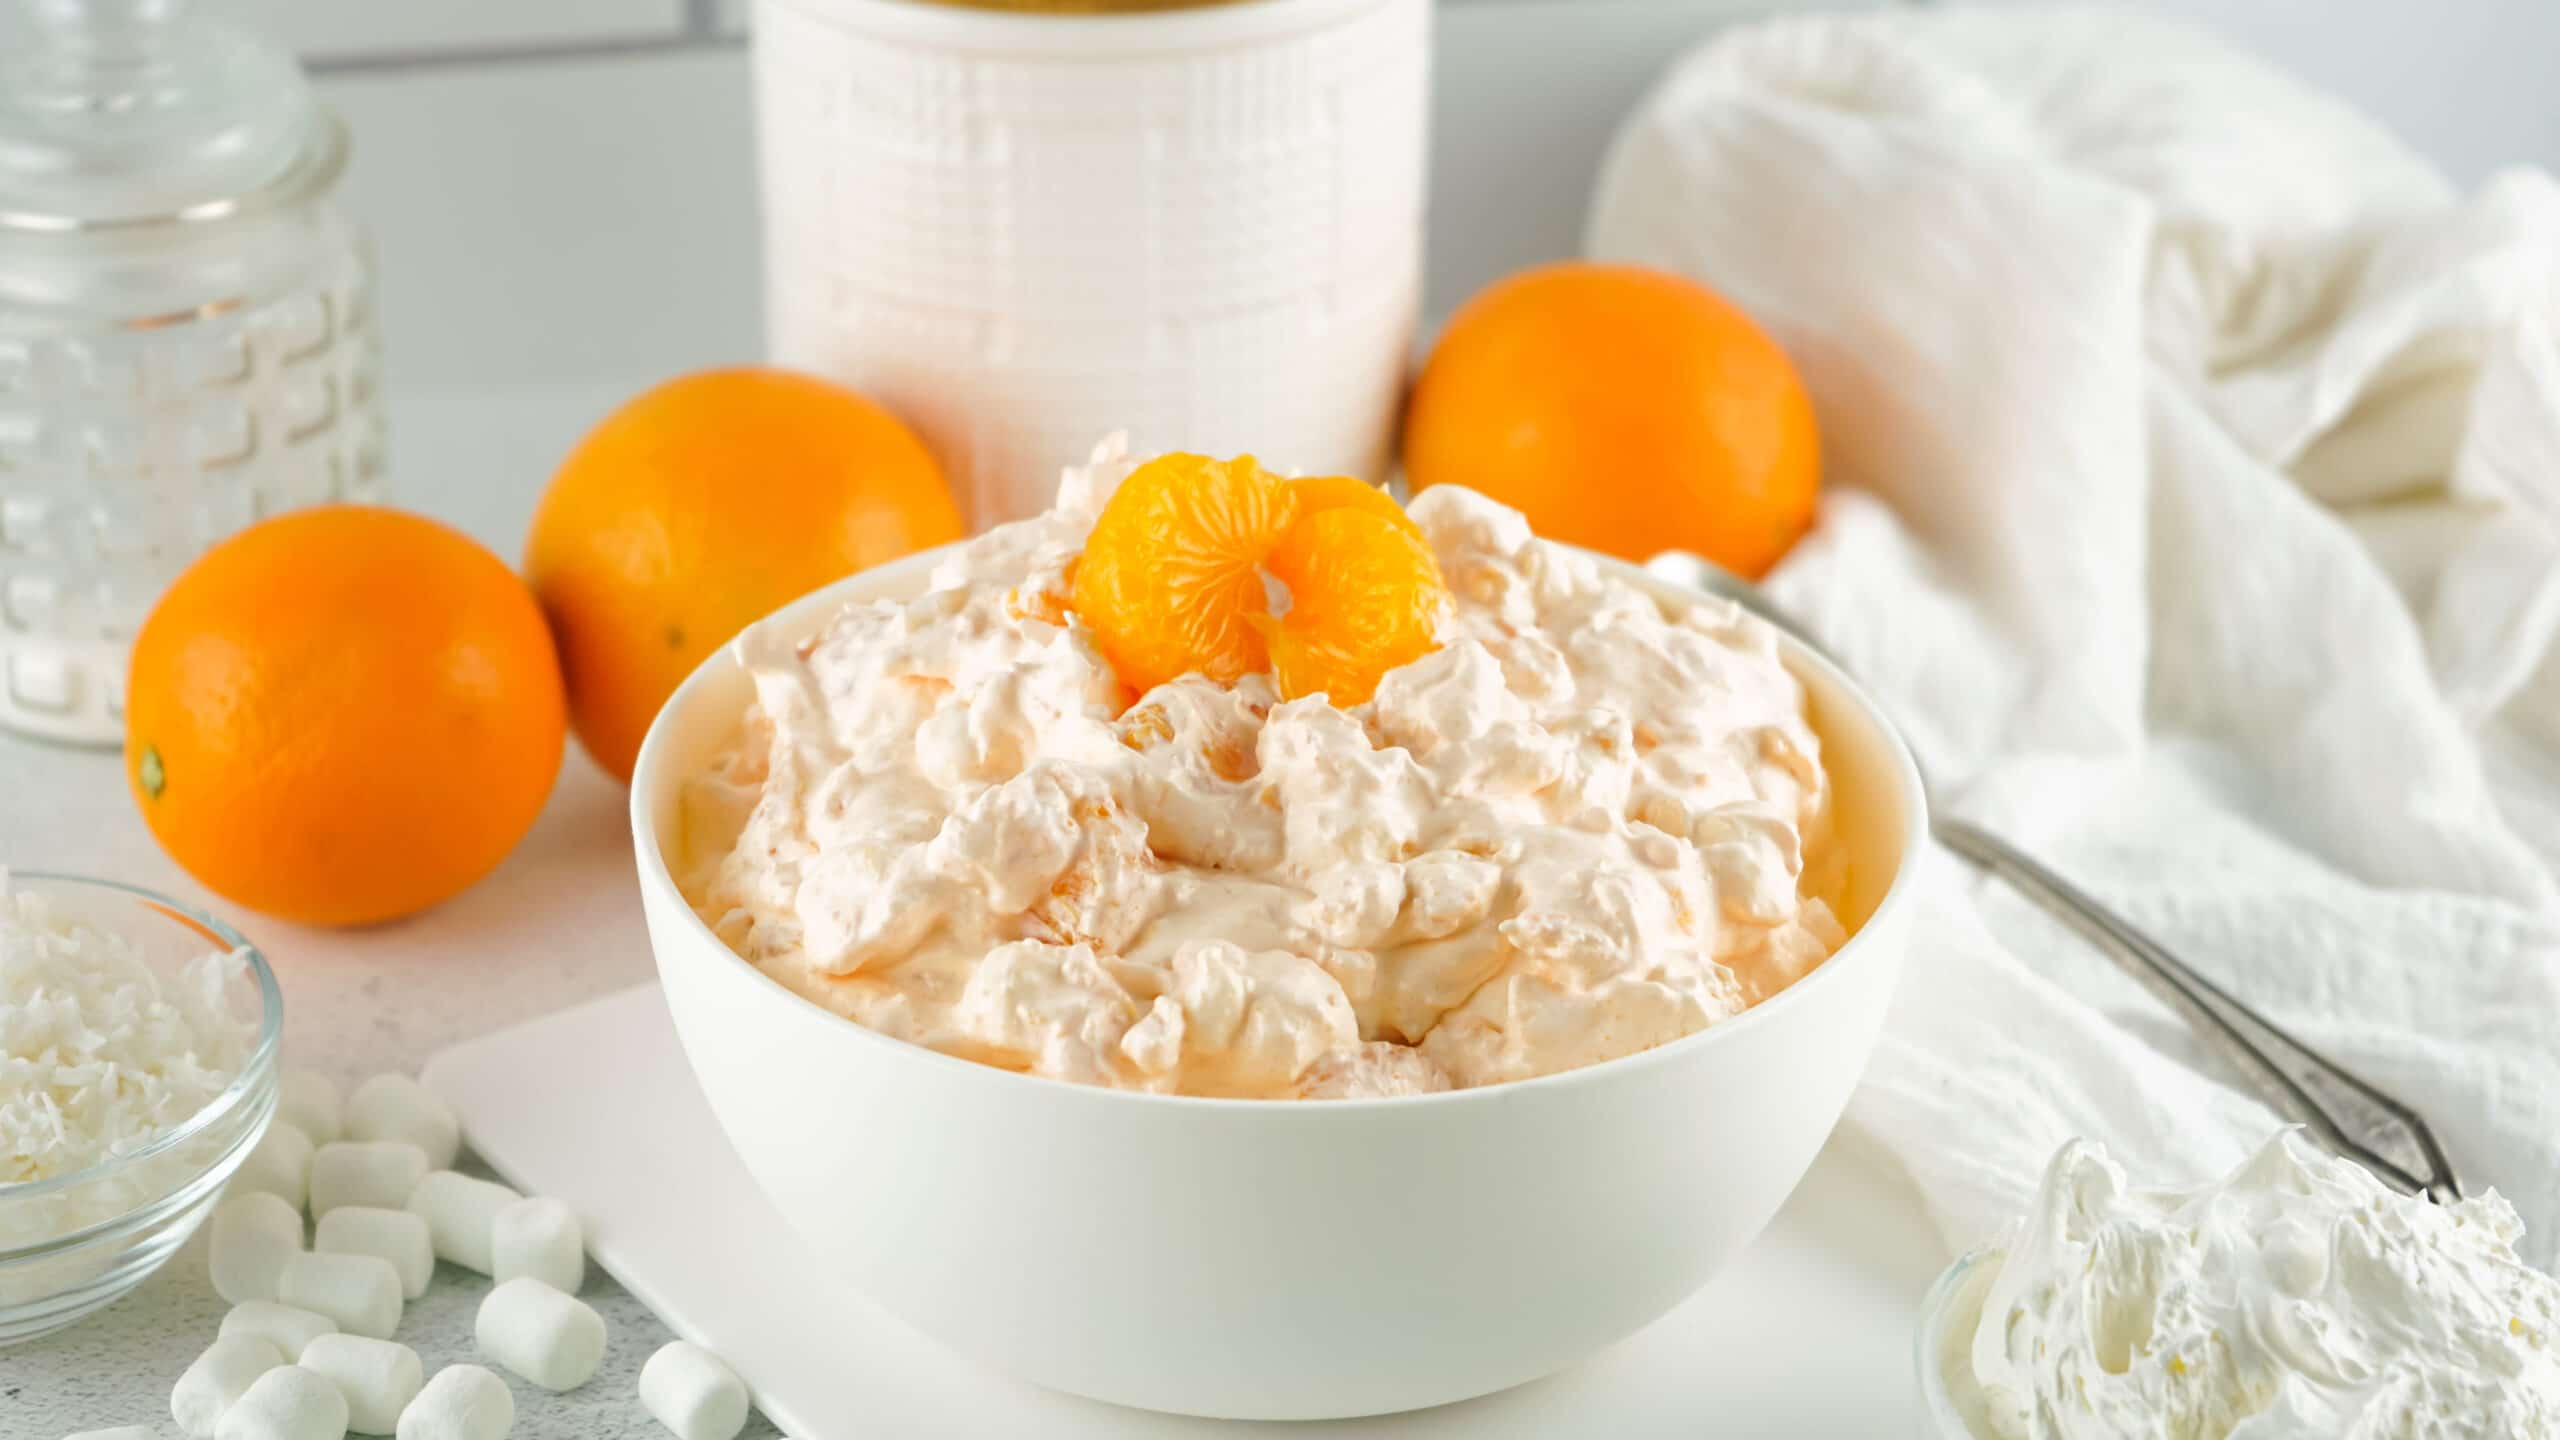 Orange fluff mixed in a white bowl. Oranges and a bowl of shredded coconut in the background 